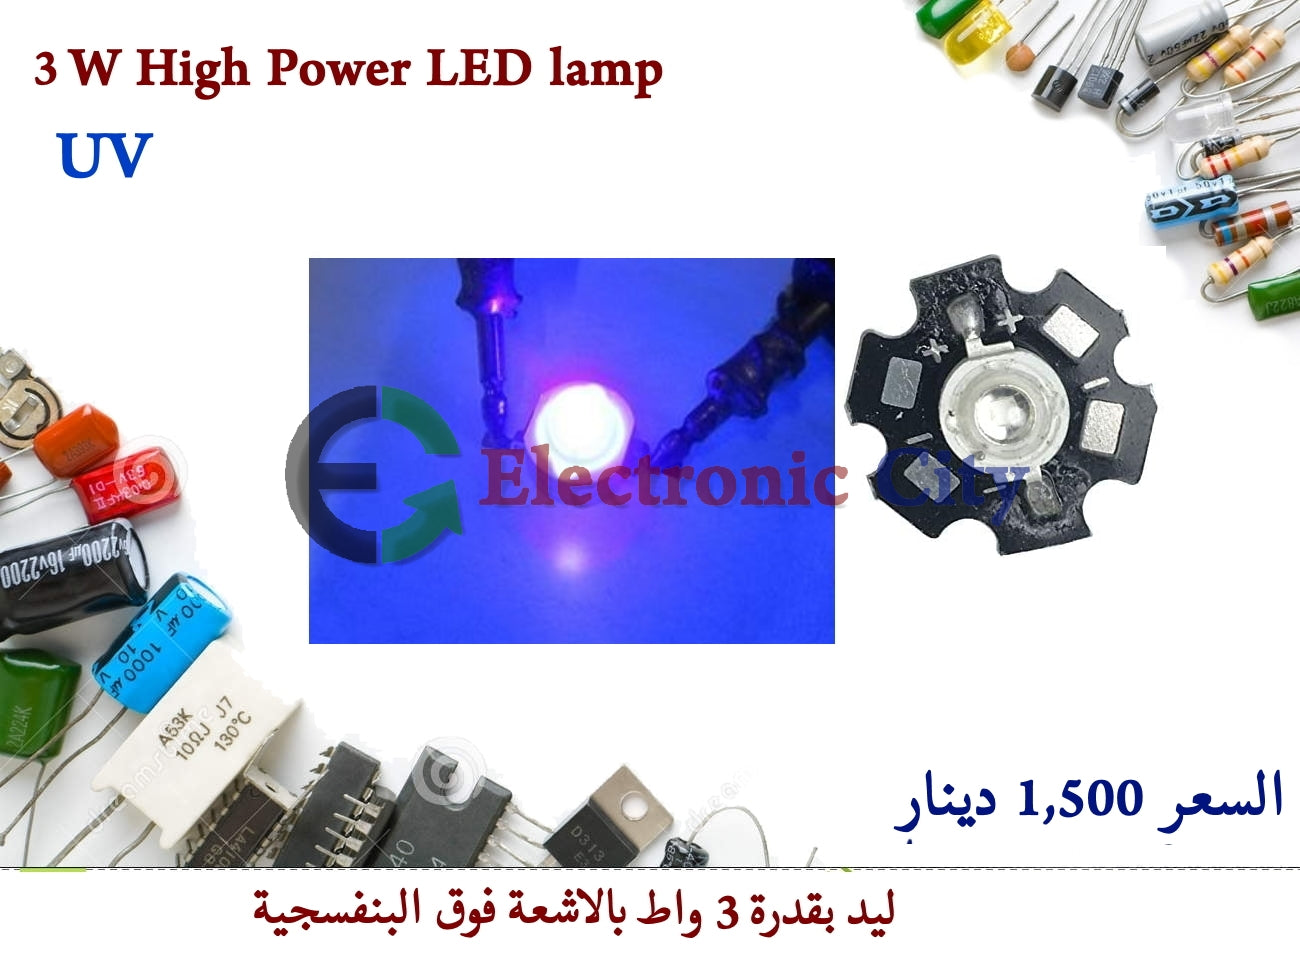 3W High Power LED lamp UV with PCB